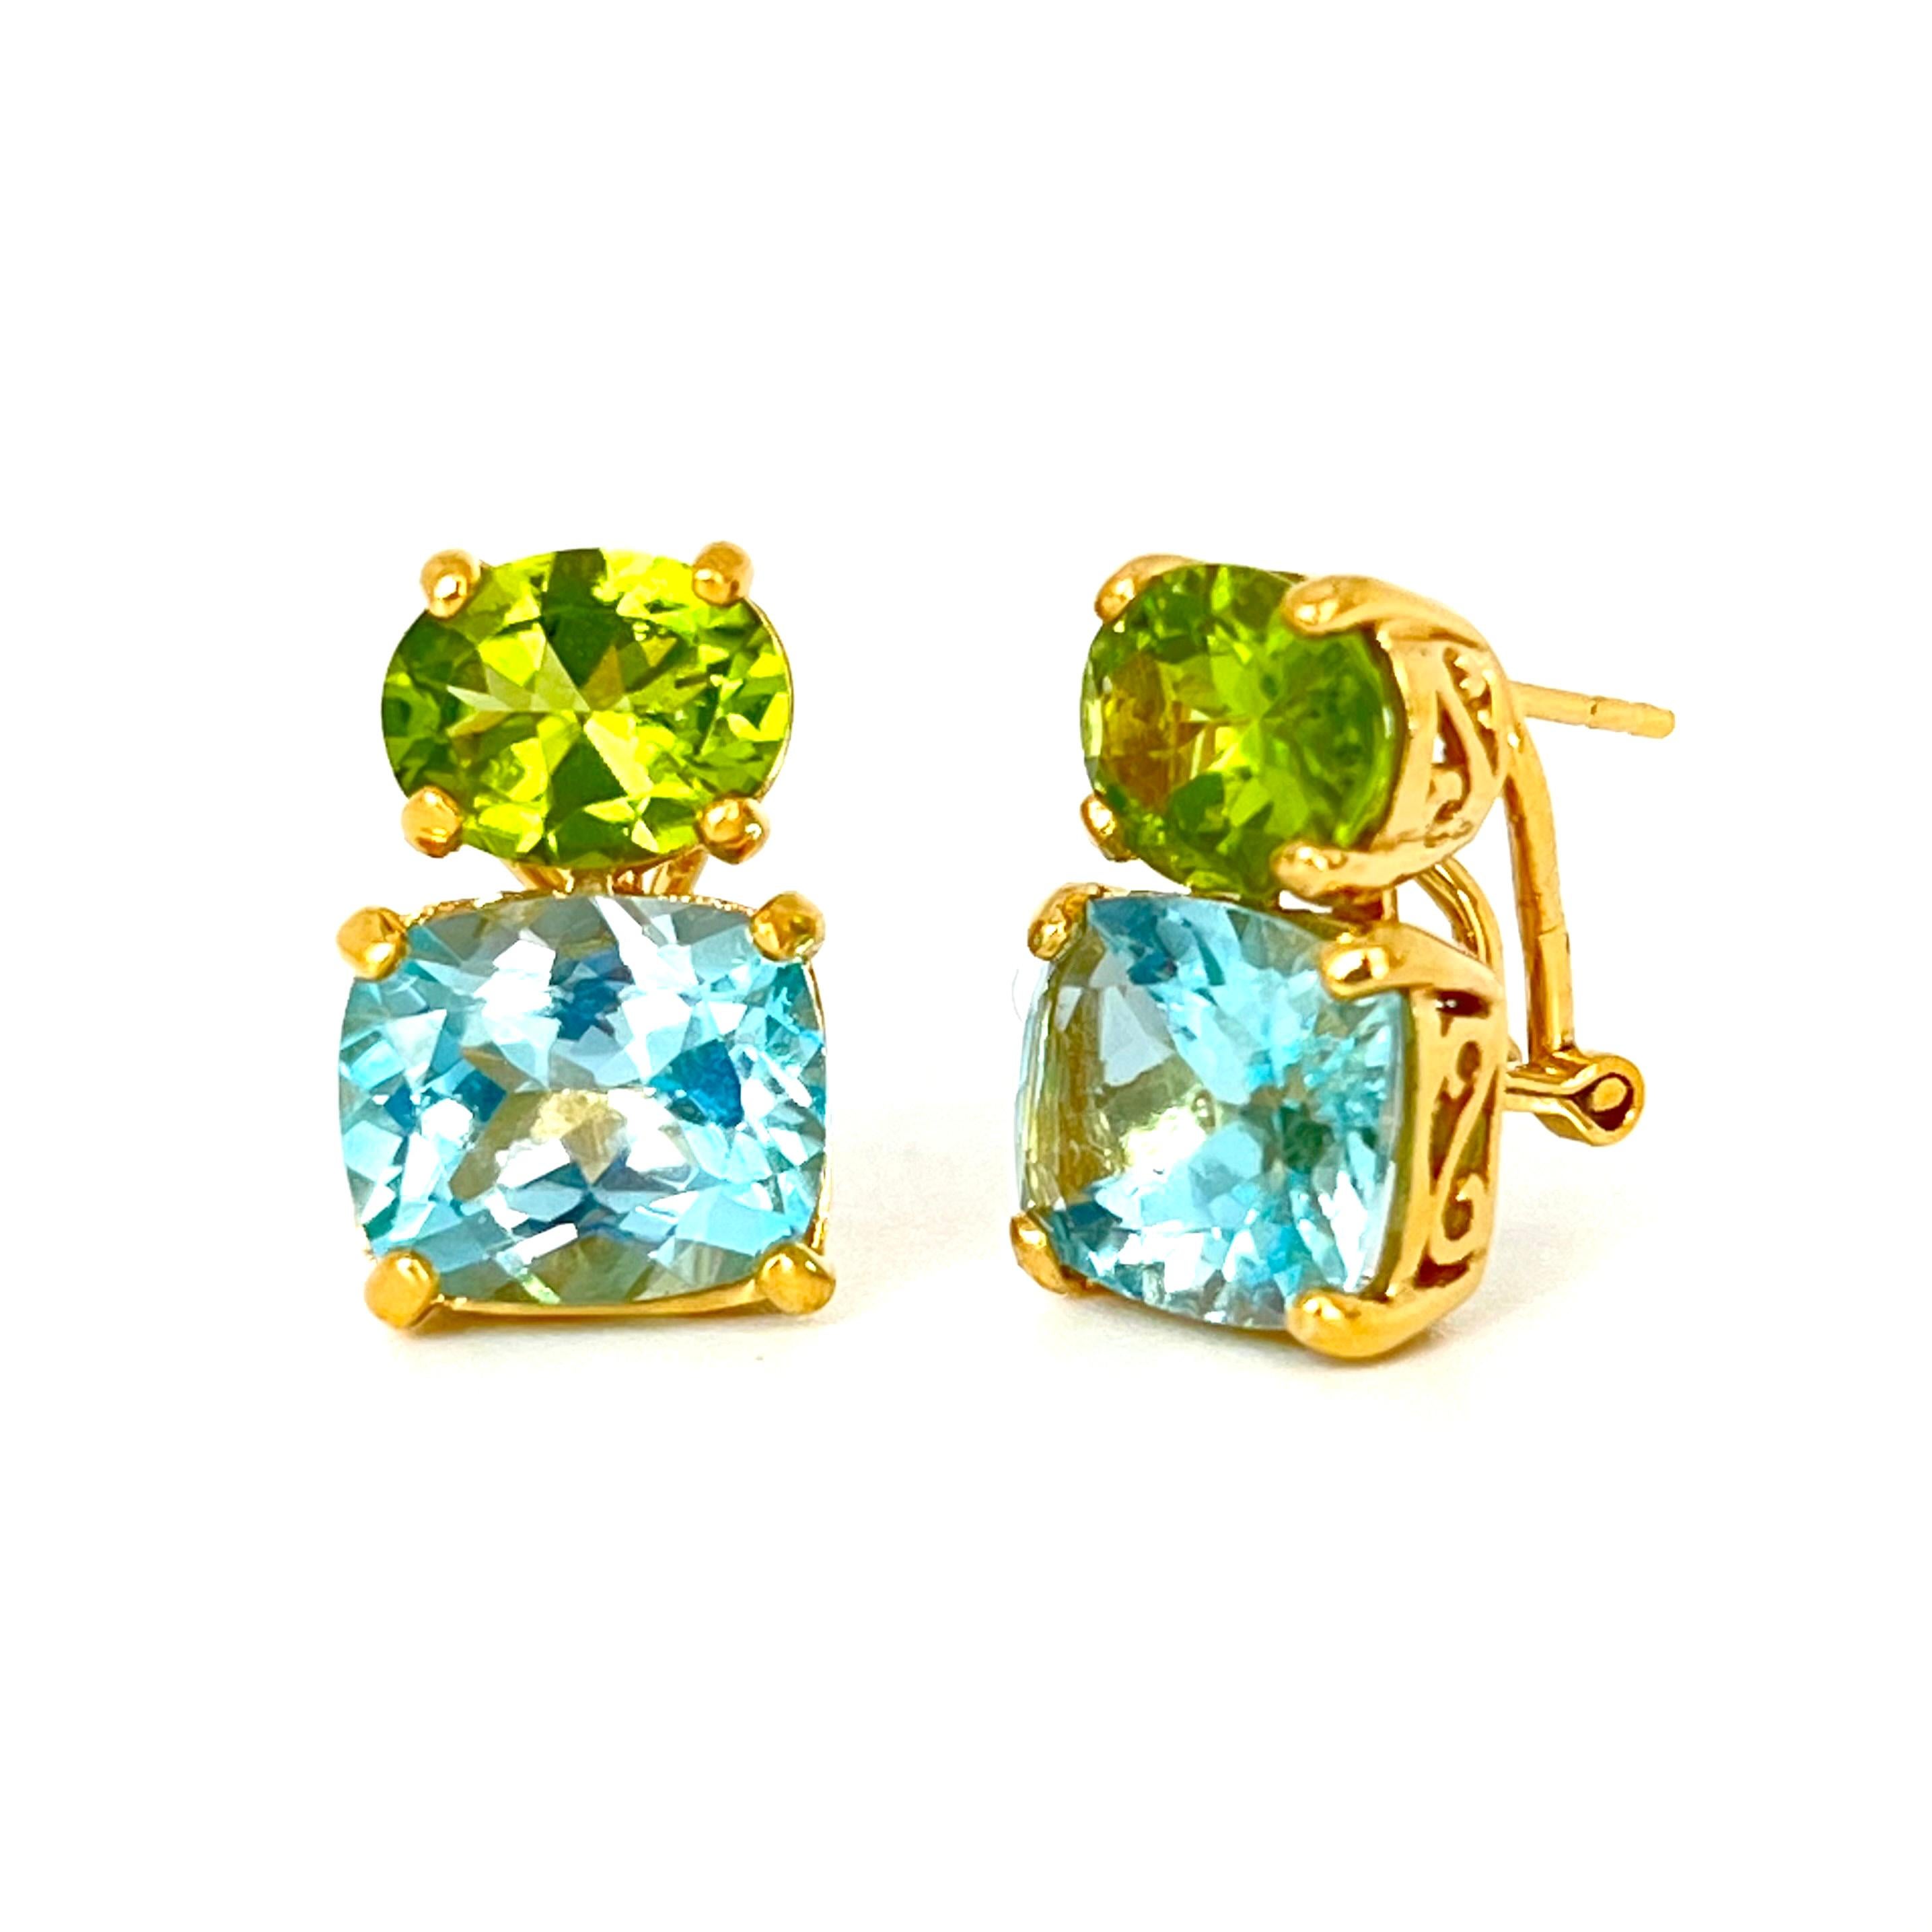 Contemporary Stunning Genuine Oval Peridot and Cushion-cut Blue Topaz Vermeil Earrings